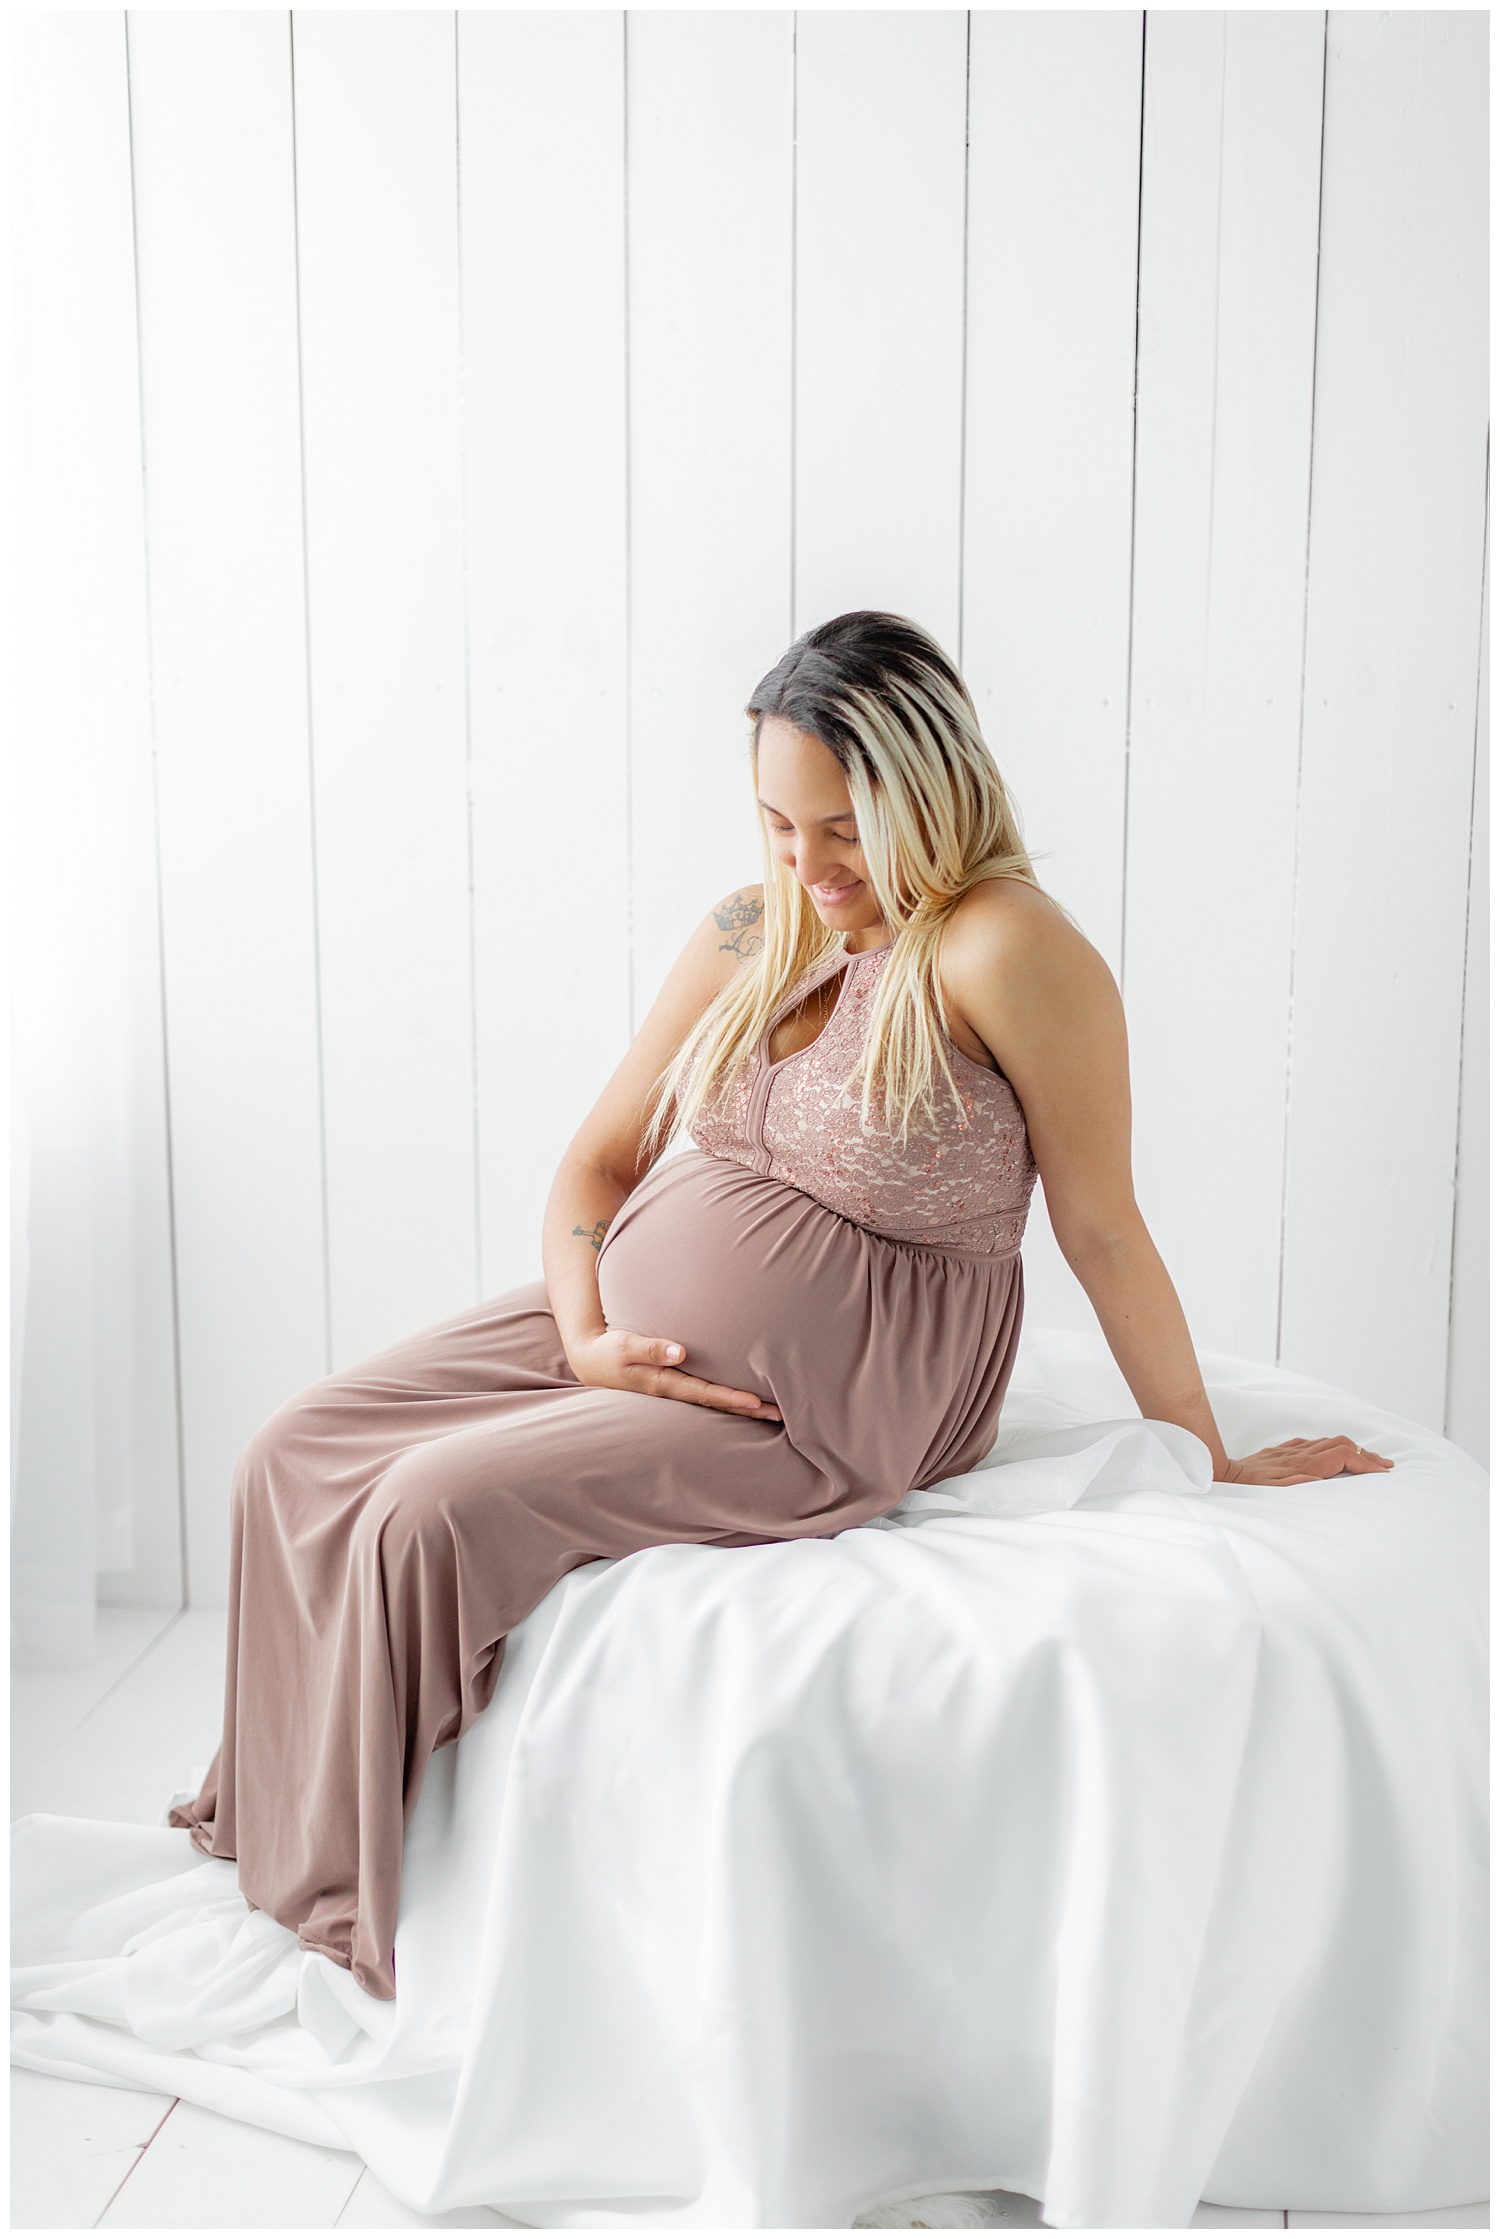 Karen patiently waits for the arrival of her baby girl while lounging on a white ottoman and wearing a blush maxi dress | CB Studio